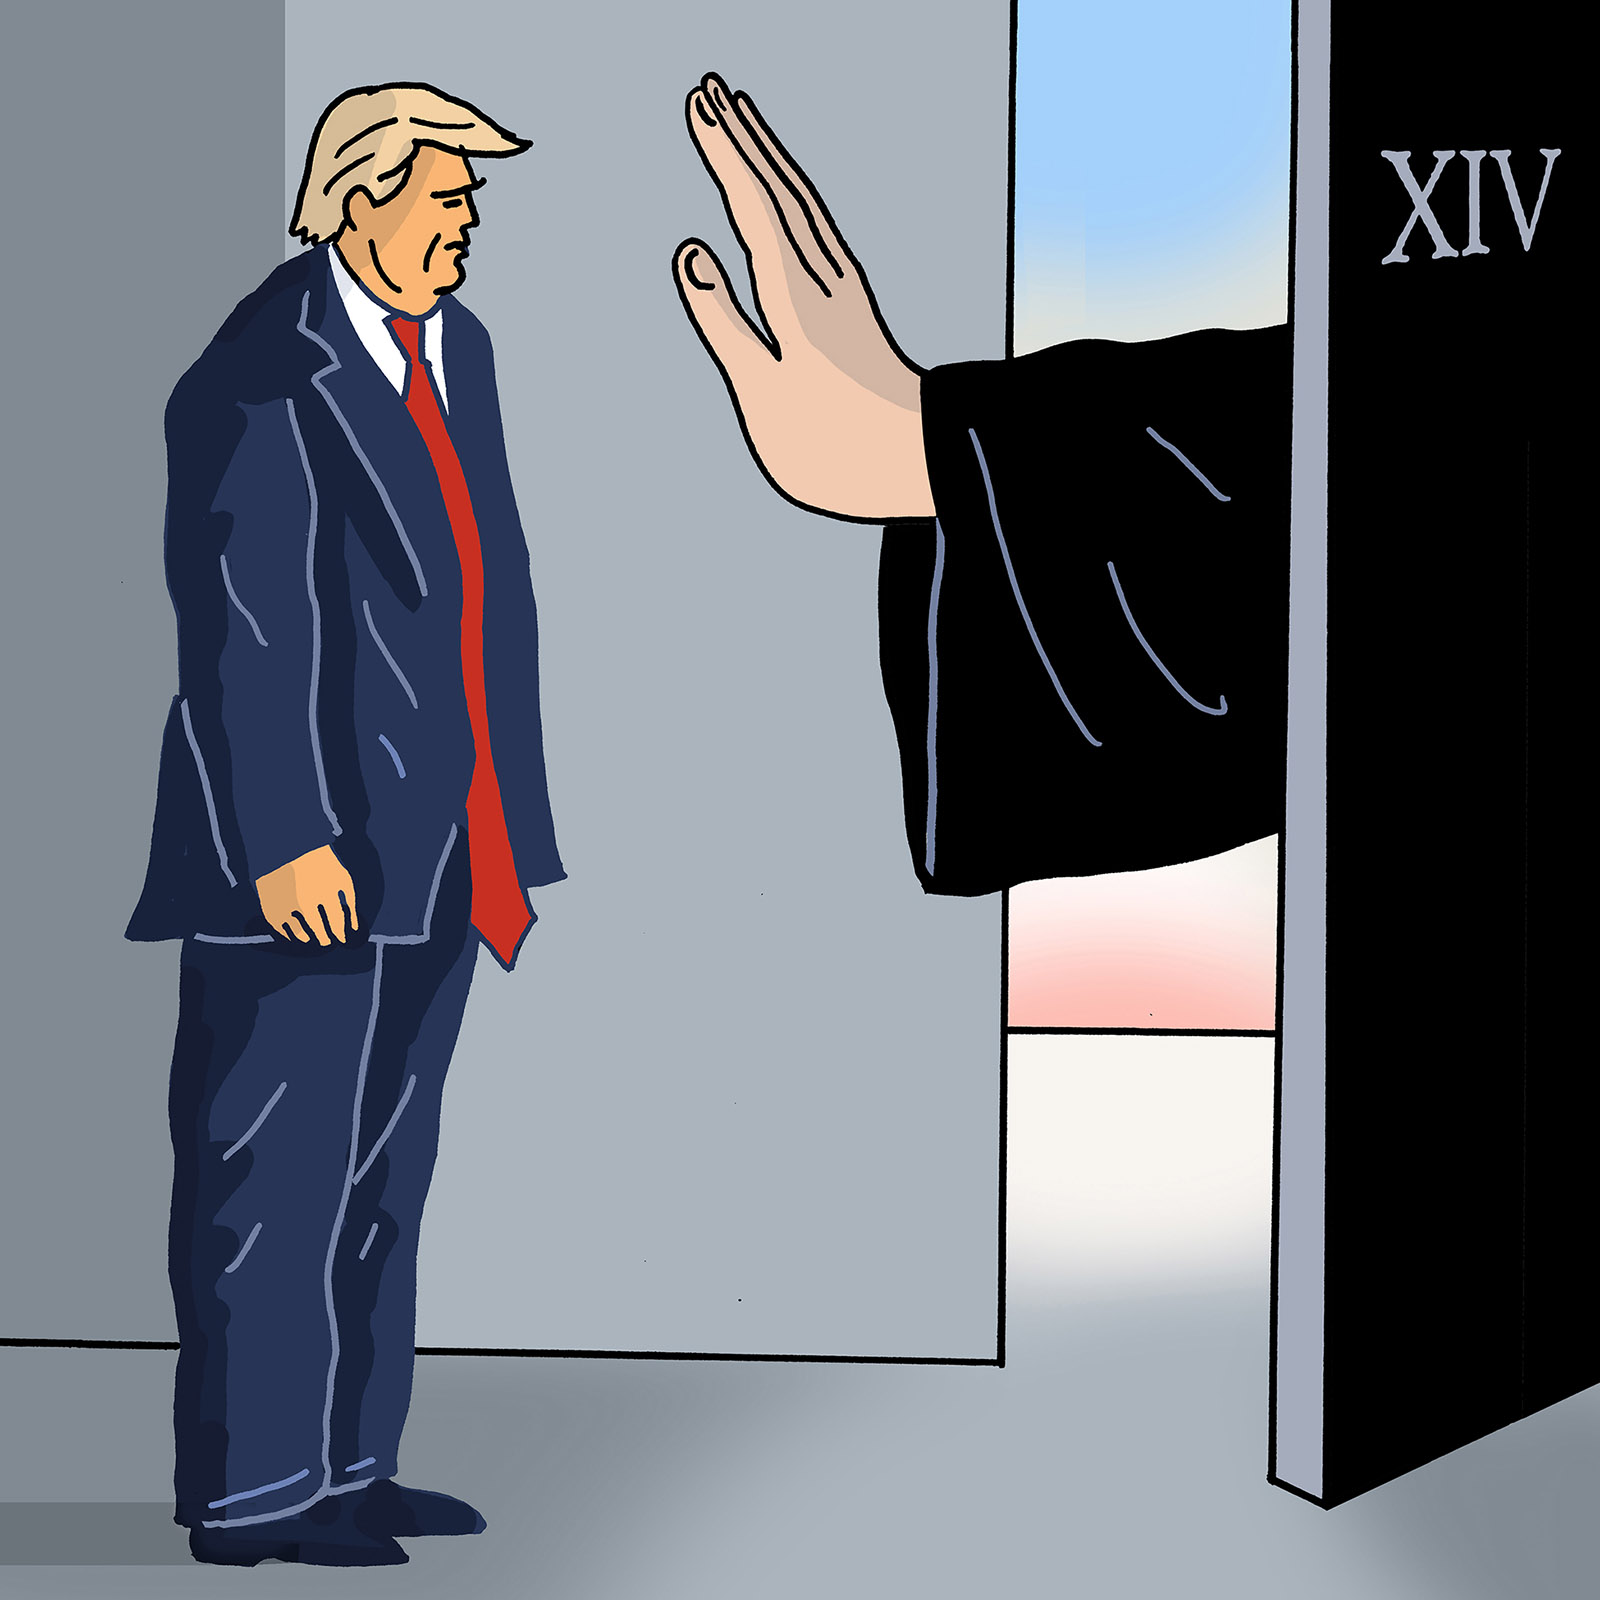 An outstretched hand stops Trump from passing through a door with XIV on it